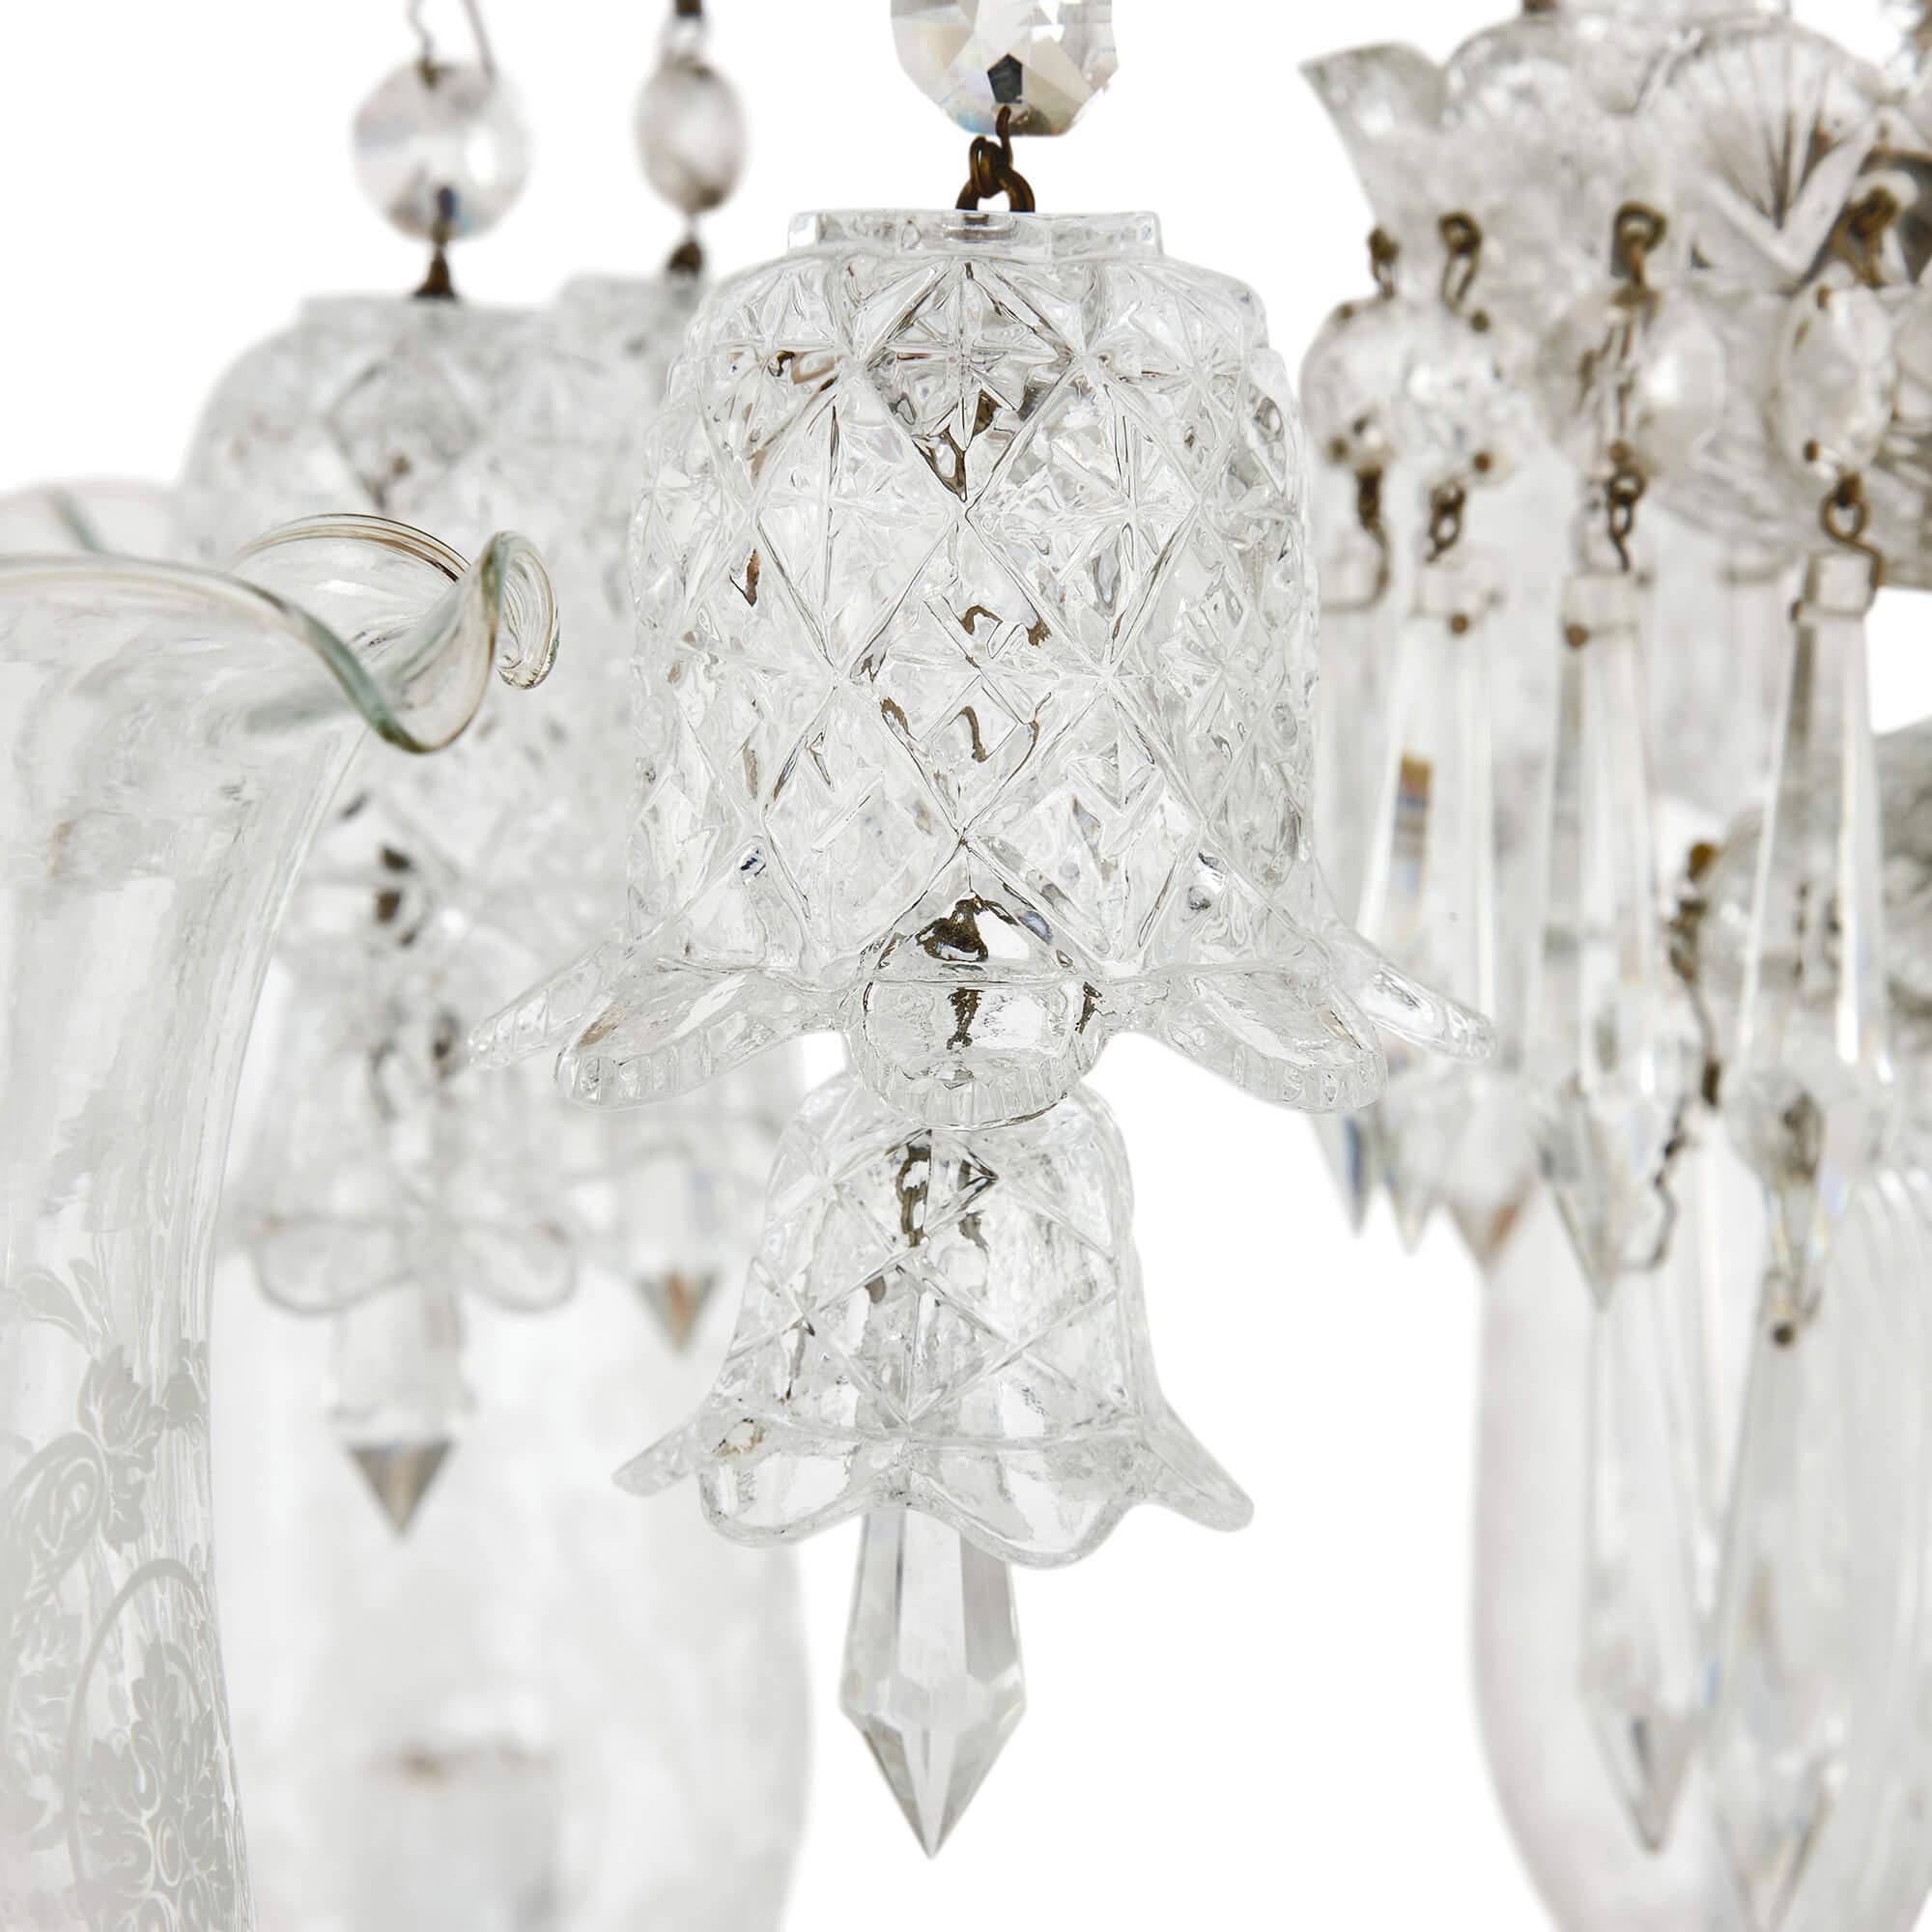 Pair of Belle Époque clear cut and etched glass 6-light chandeliers 
Continental, 20th Century 
Height 70cm, diameter 64cm

Crafted in the Belle Époque style popular in France in the late 19th and early 20th centuries, this pair of chandeliers would